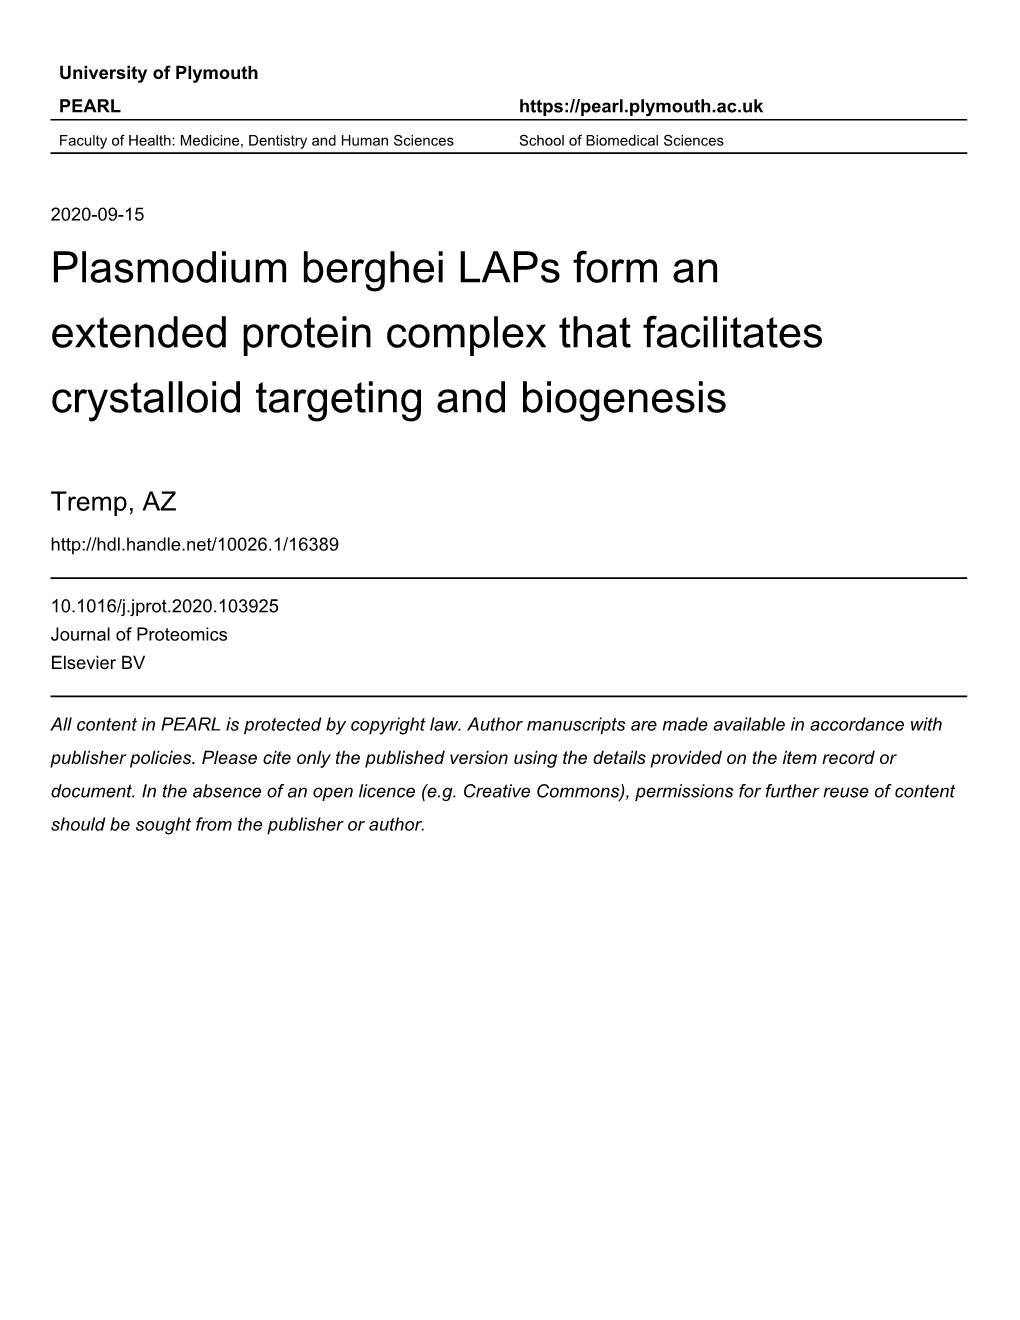 Plasmodium Berghei Laps Form an Extended Protein Complex That Facilitates Crystalloid Targeting and Biogenesis